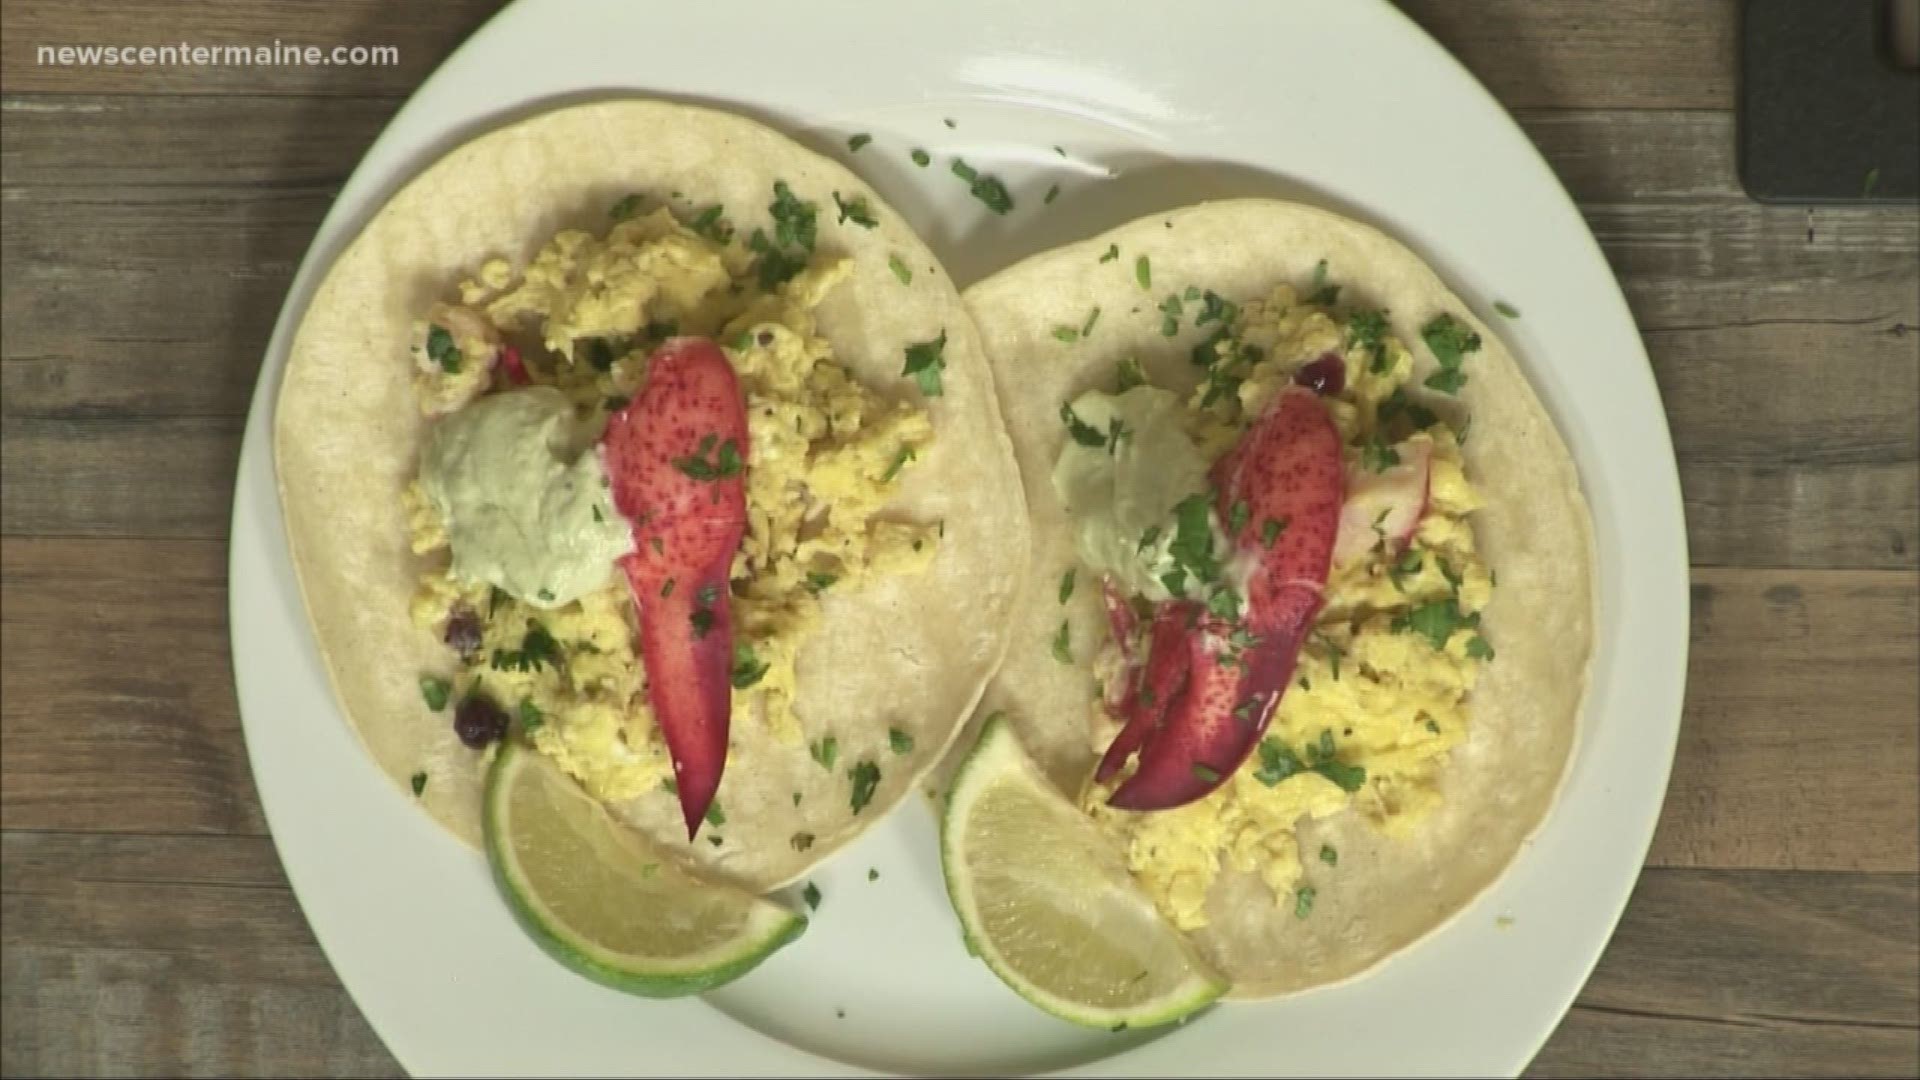 Fresh off the Food Network show, chef Dave Mallari makes lobster breakfast tacos